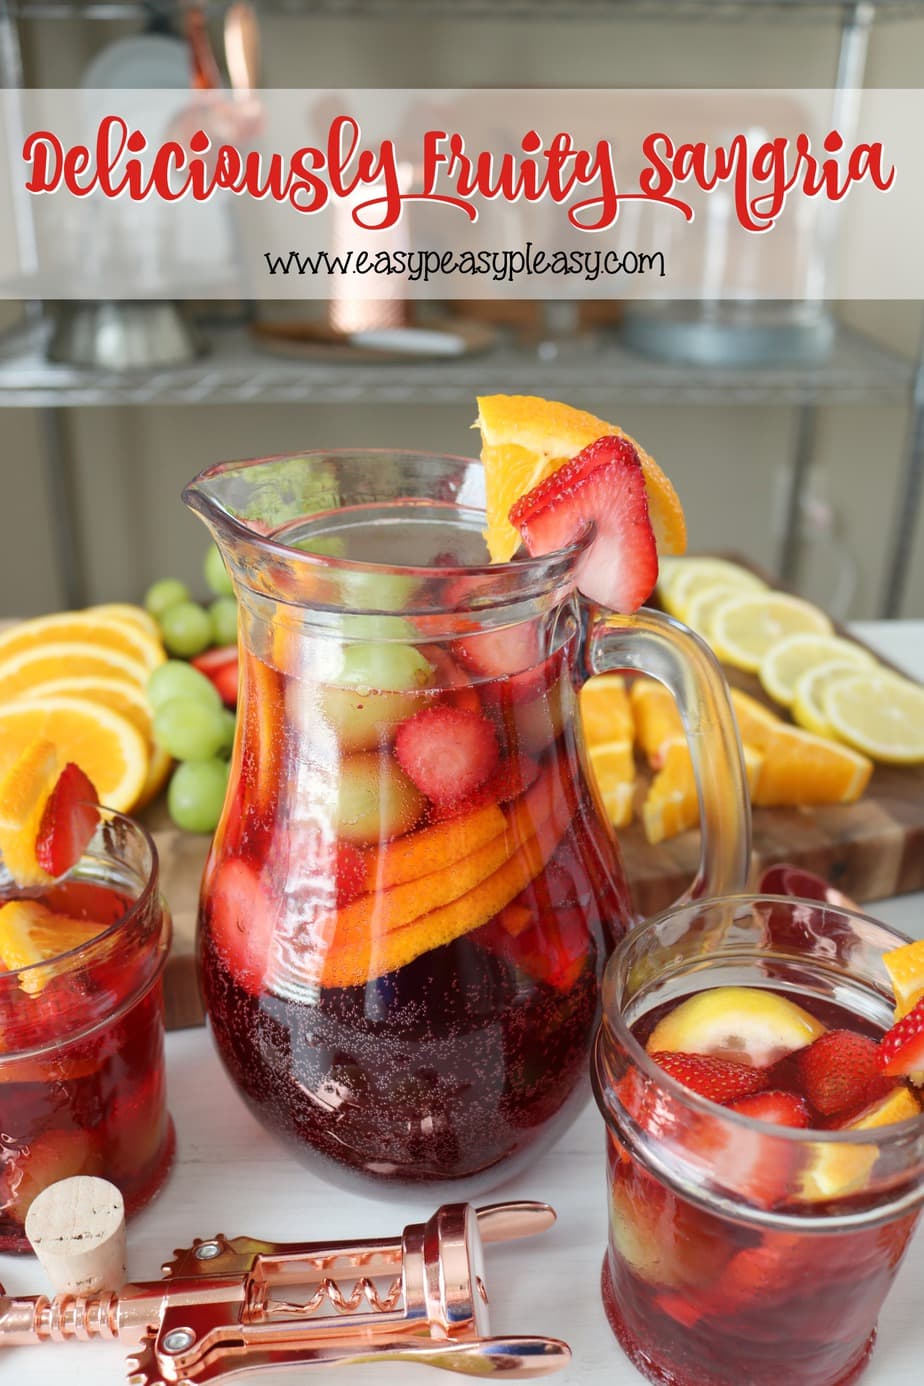 Turn up your gathering with this super easy and Deliciously Fruity Sangria.